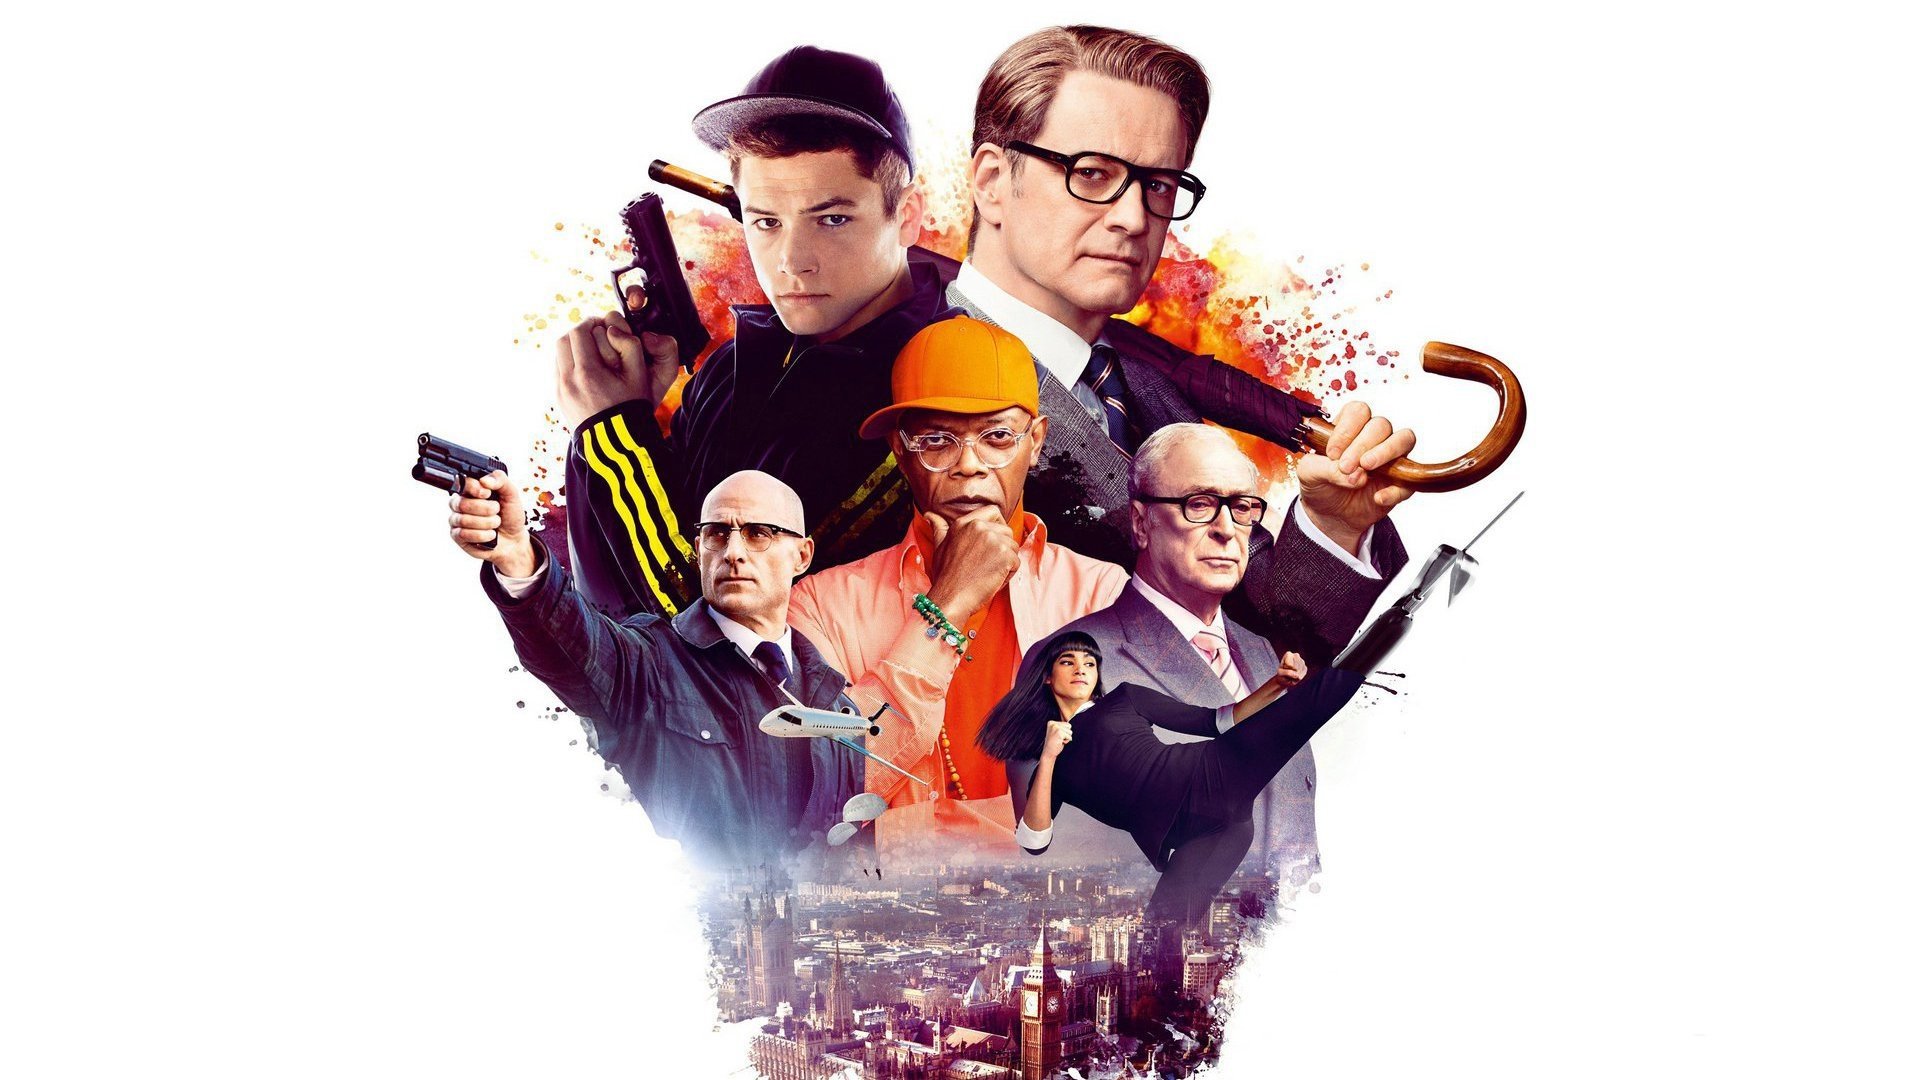 General 1920x1080 Kingsman movie poster movies Samuel L. Jackson Colin Firth Mark Strong Sofia Boutella Taron Egerton Michael Caine simple background